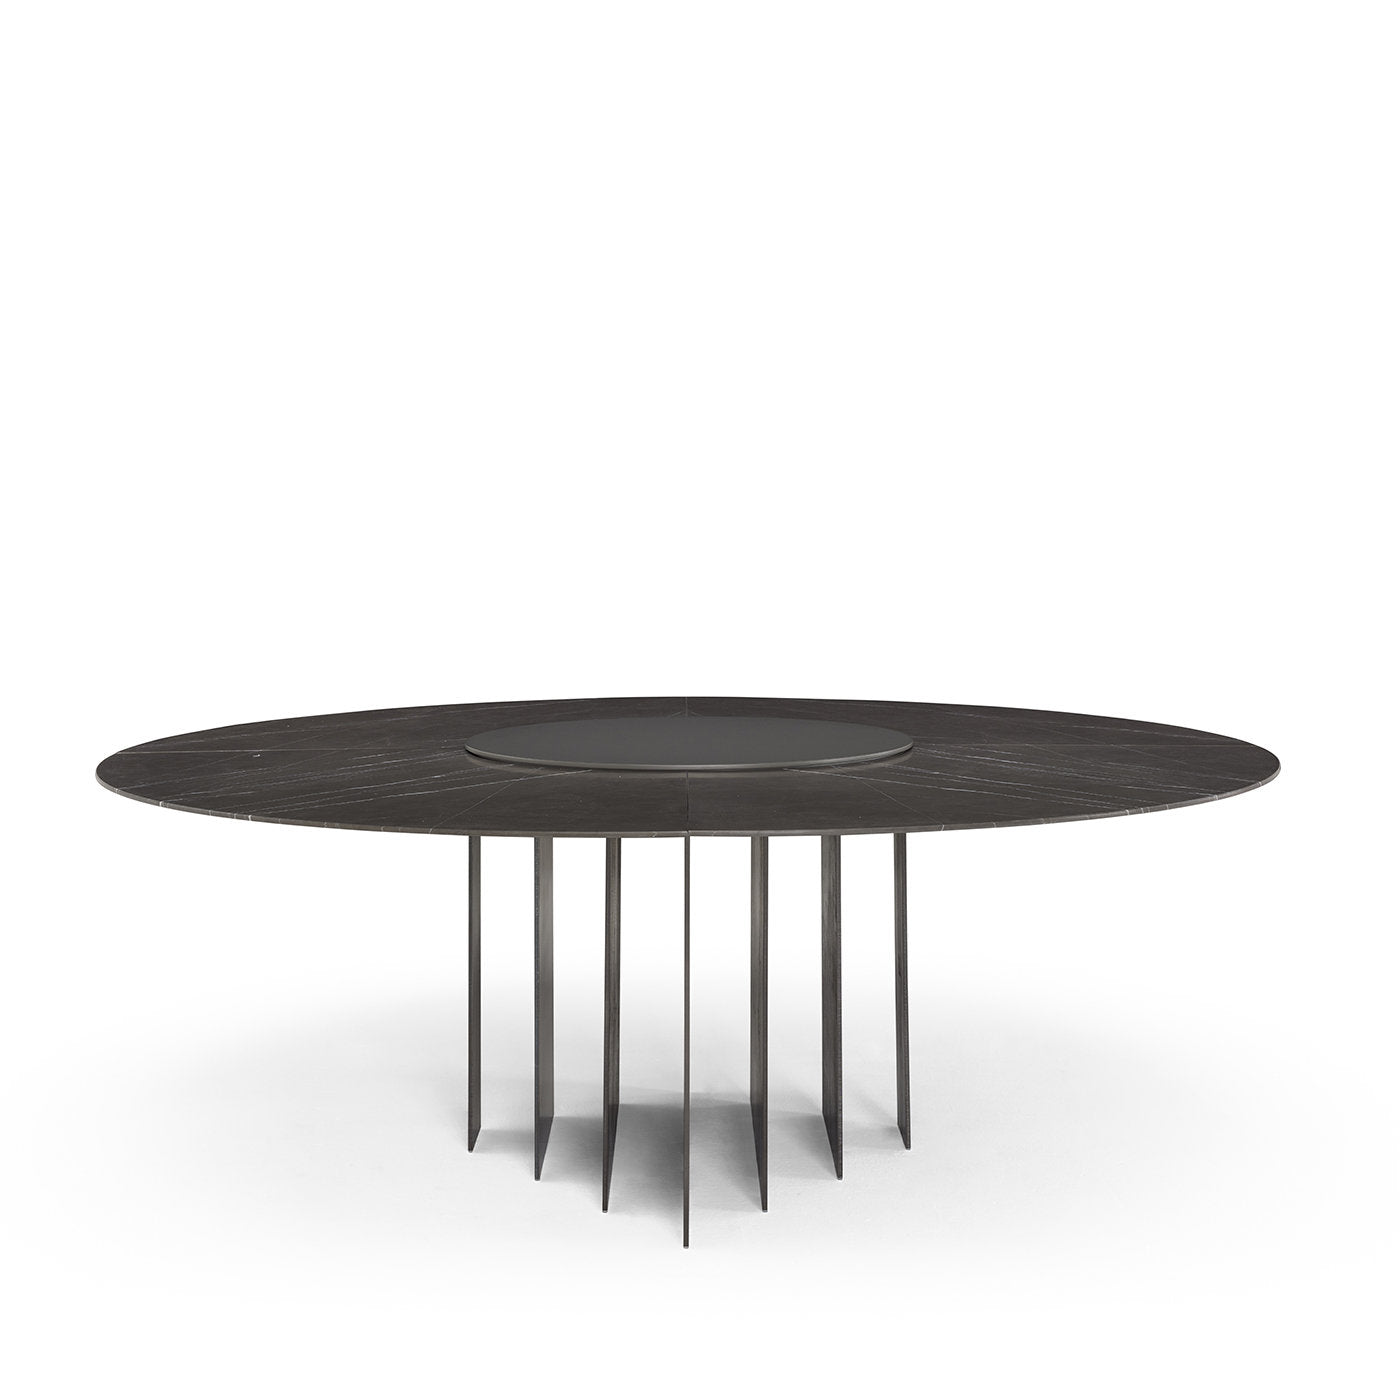 Exilis Round Dining Table - Alternative view 2